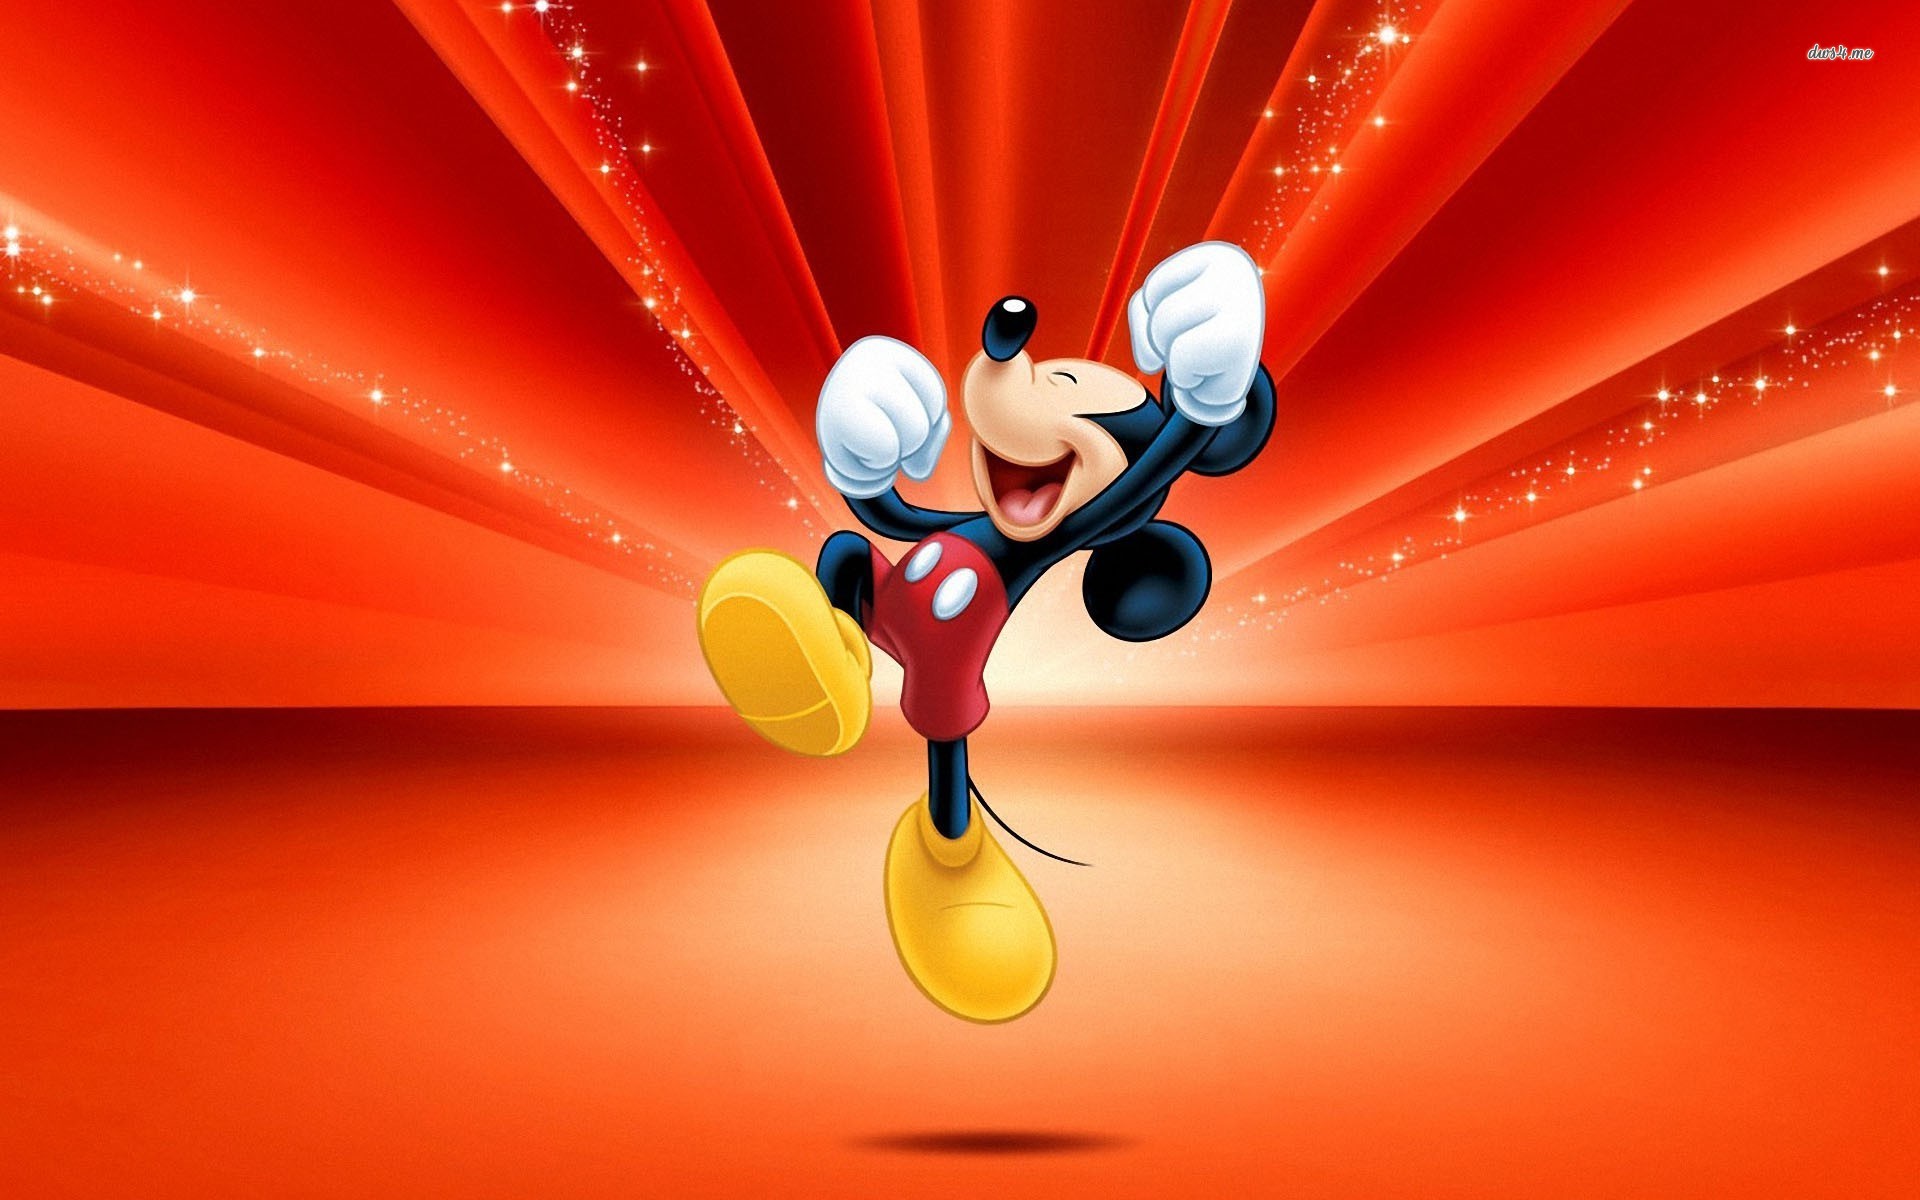 Free Download Mickey Mouse Wallpaper The Art Mad Wallpapers 19x10 For Your Desktop Mobile Tablet Explore 49 Mickey Mouse Computer Wallpaper Mickey Mouse Wallpaper For Walls Free Live Images